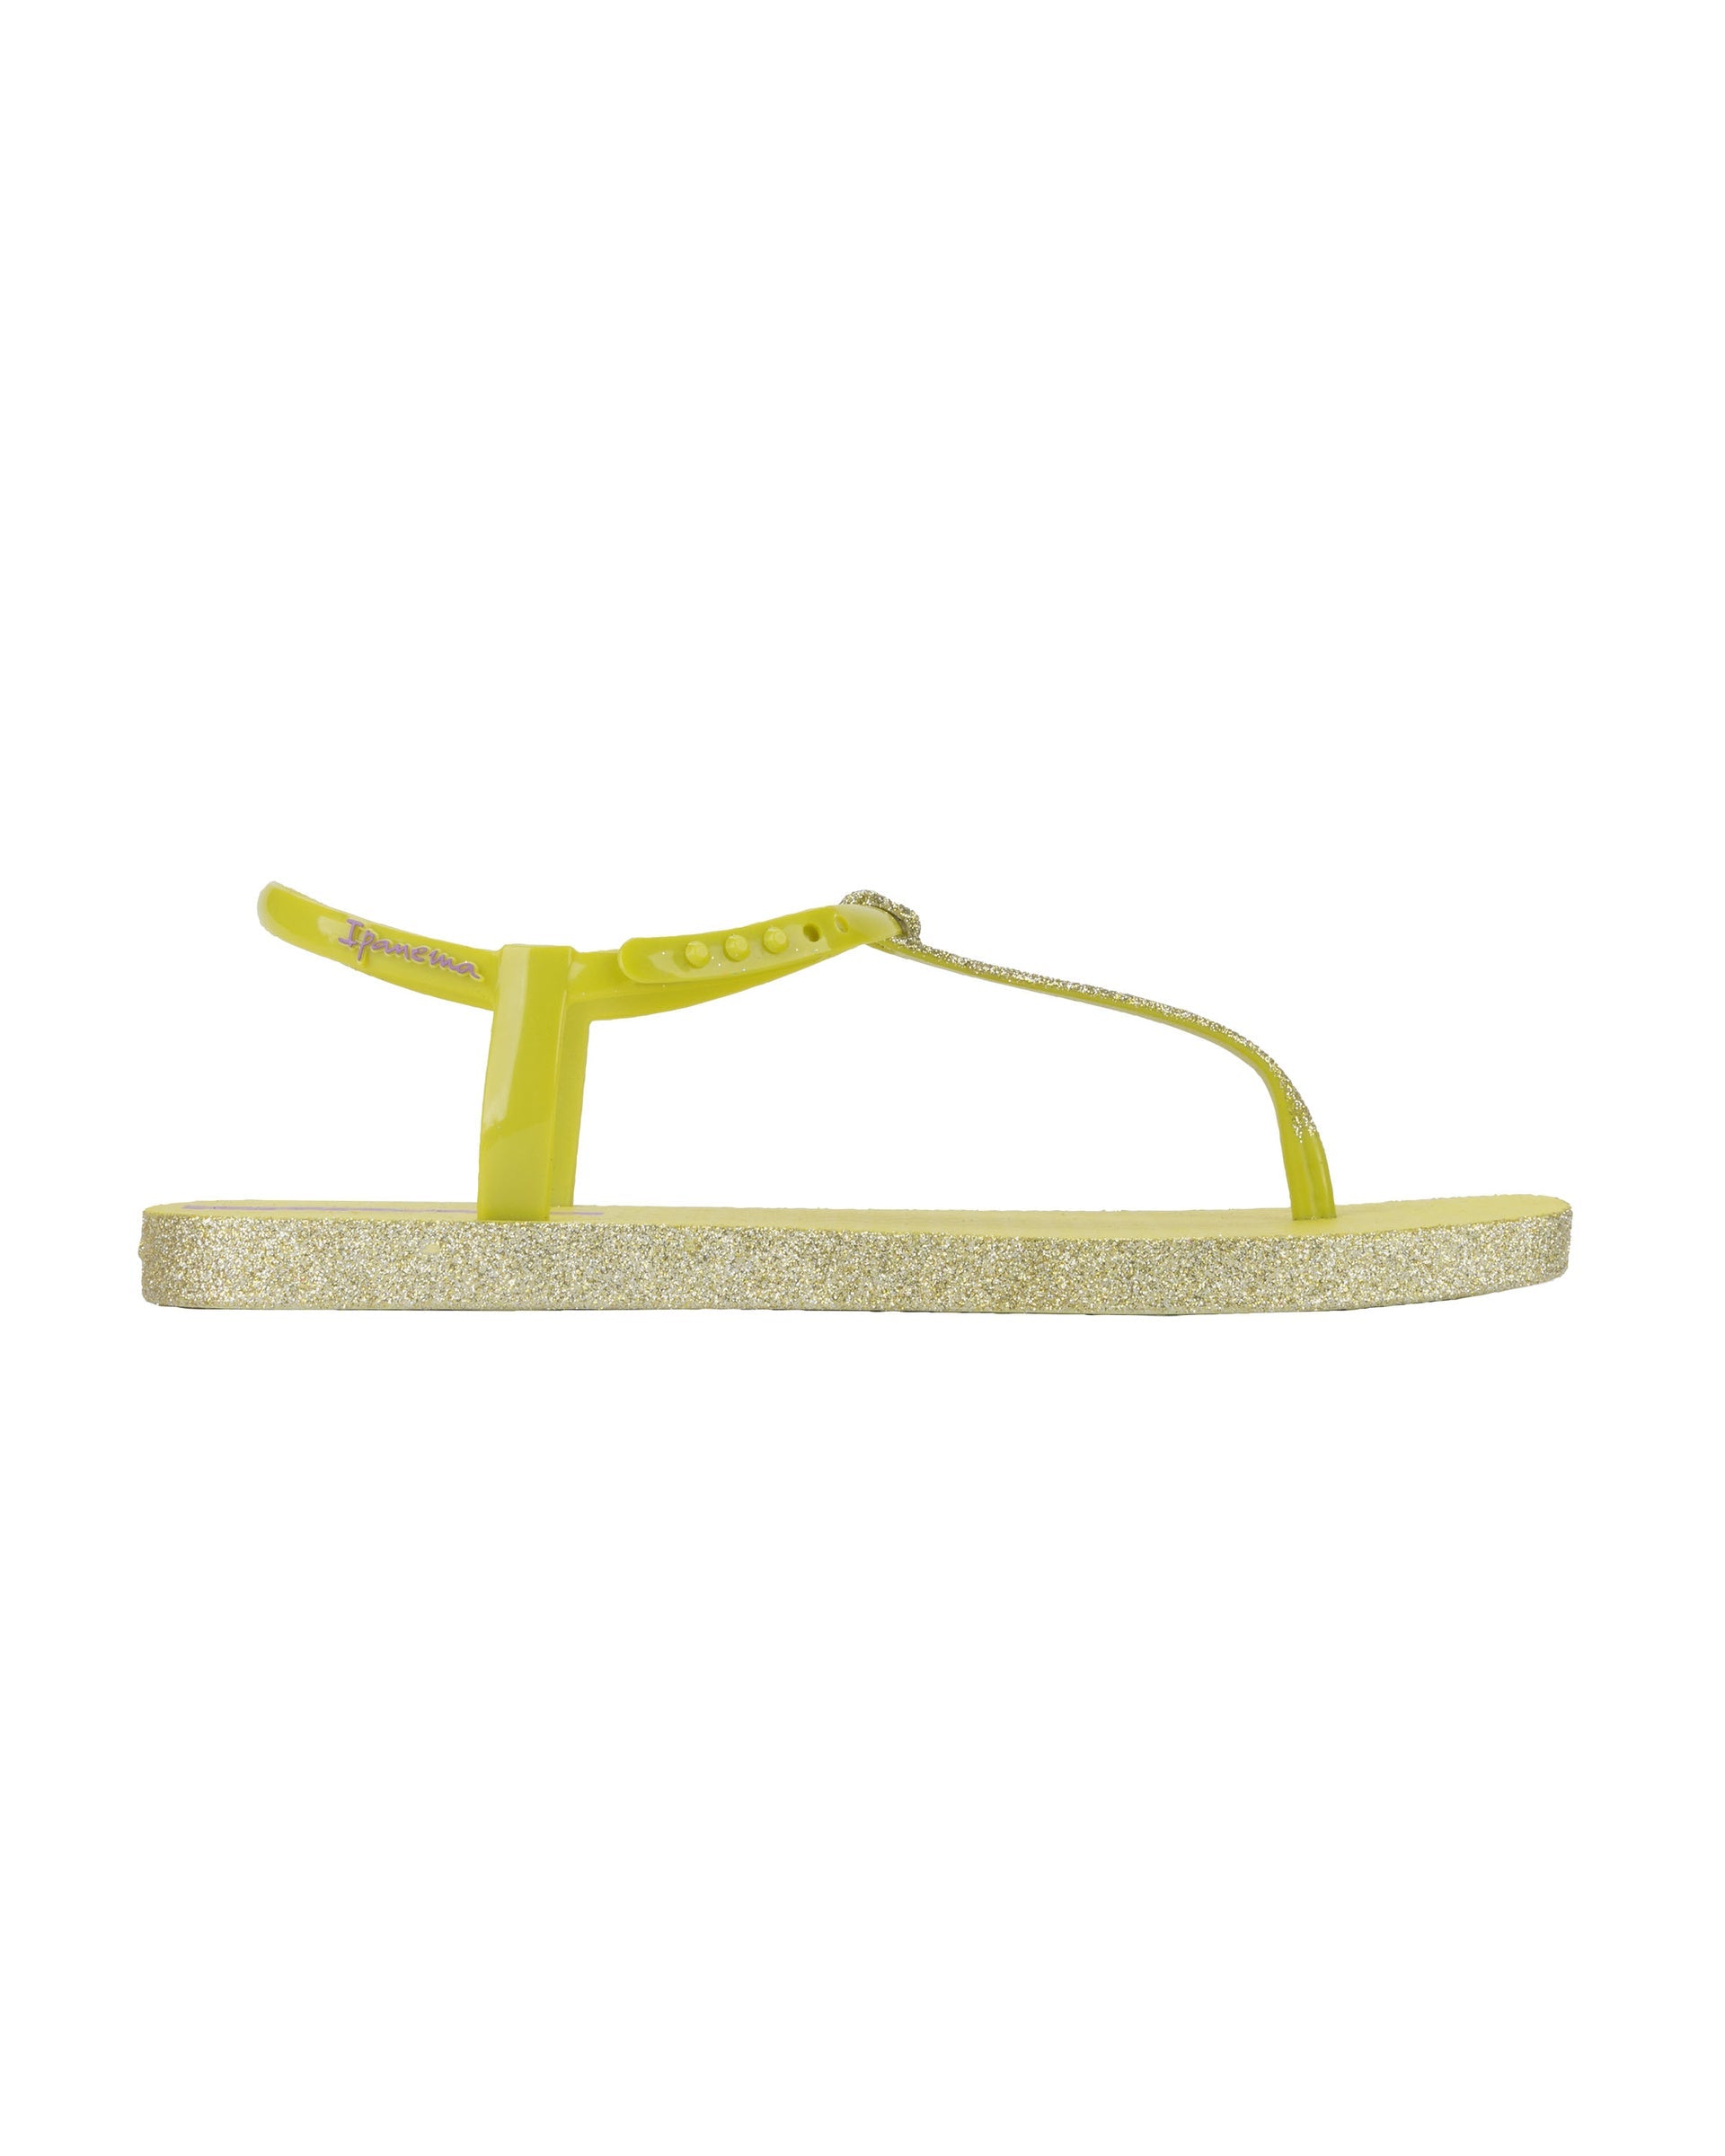 Outer side view of a green Ipanema Class Edge Glow t-strap women's sandal with glitter green thong.